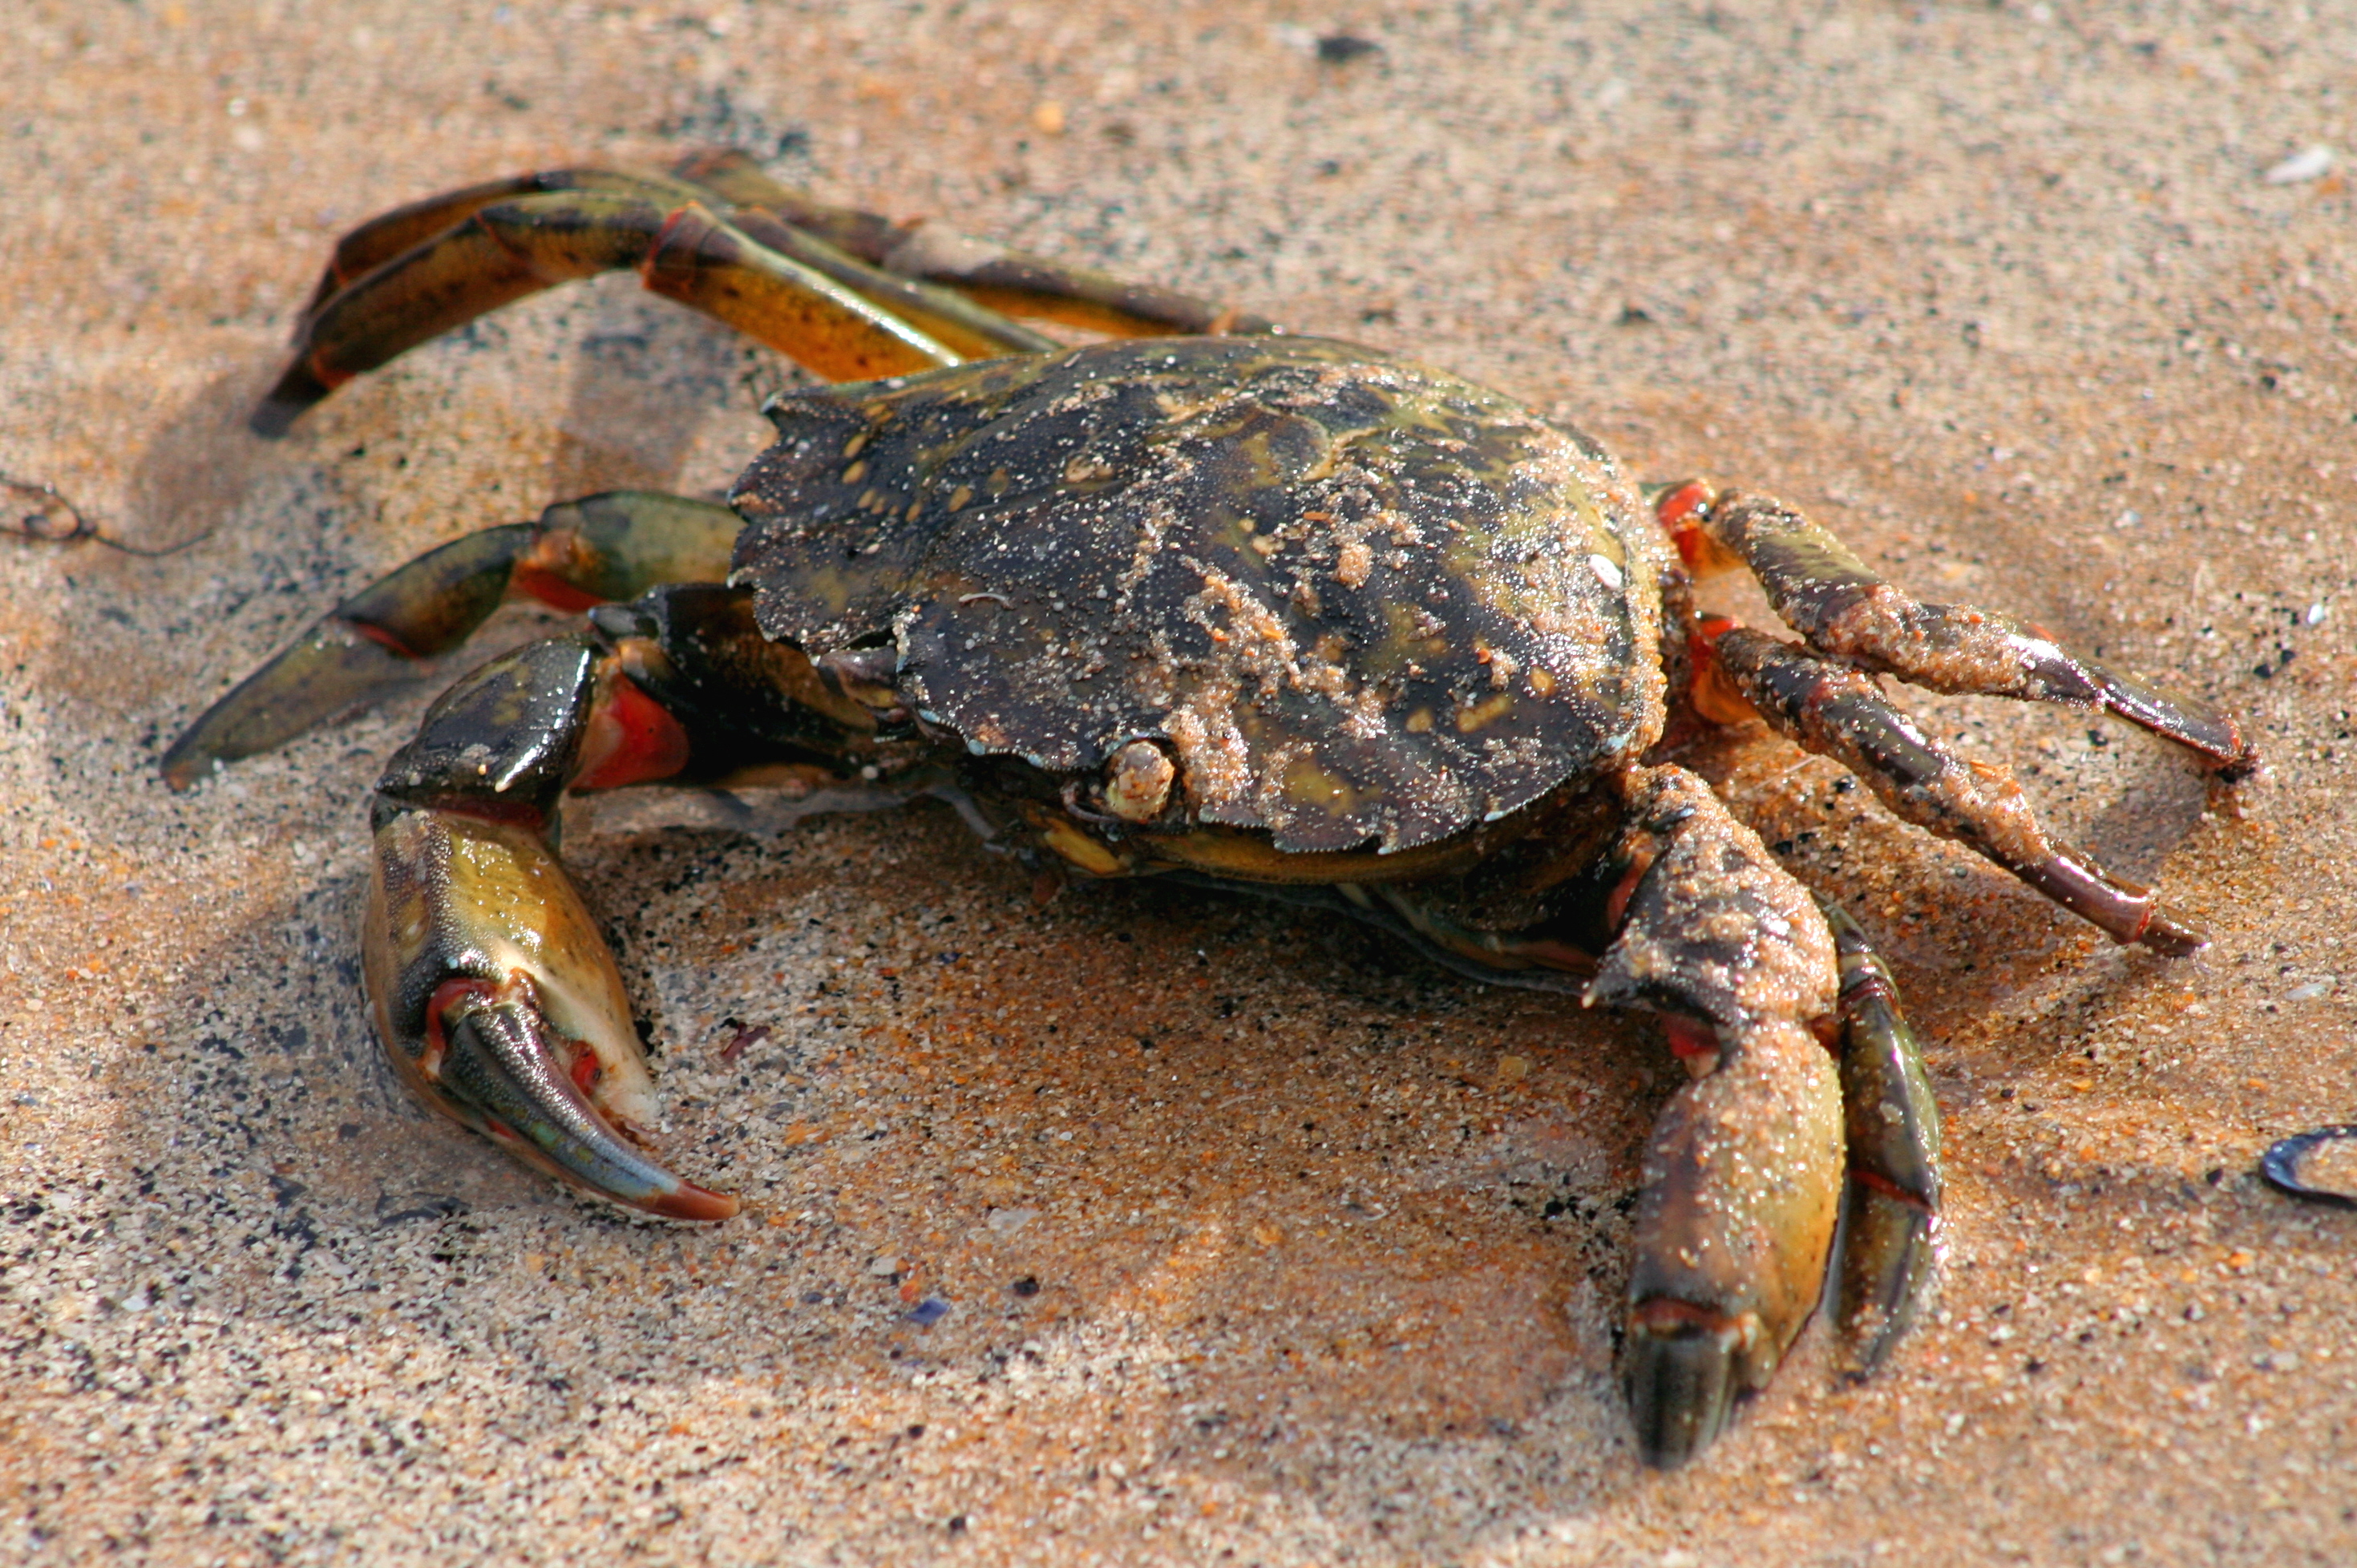 Mazes aren’t just for mice: European shore crabs exhibit spatial learning